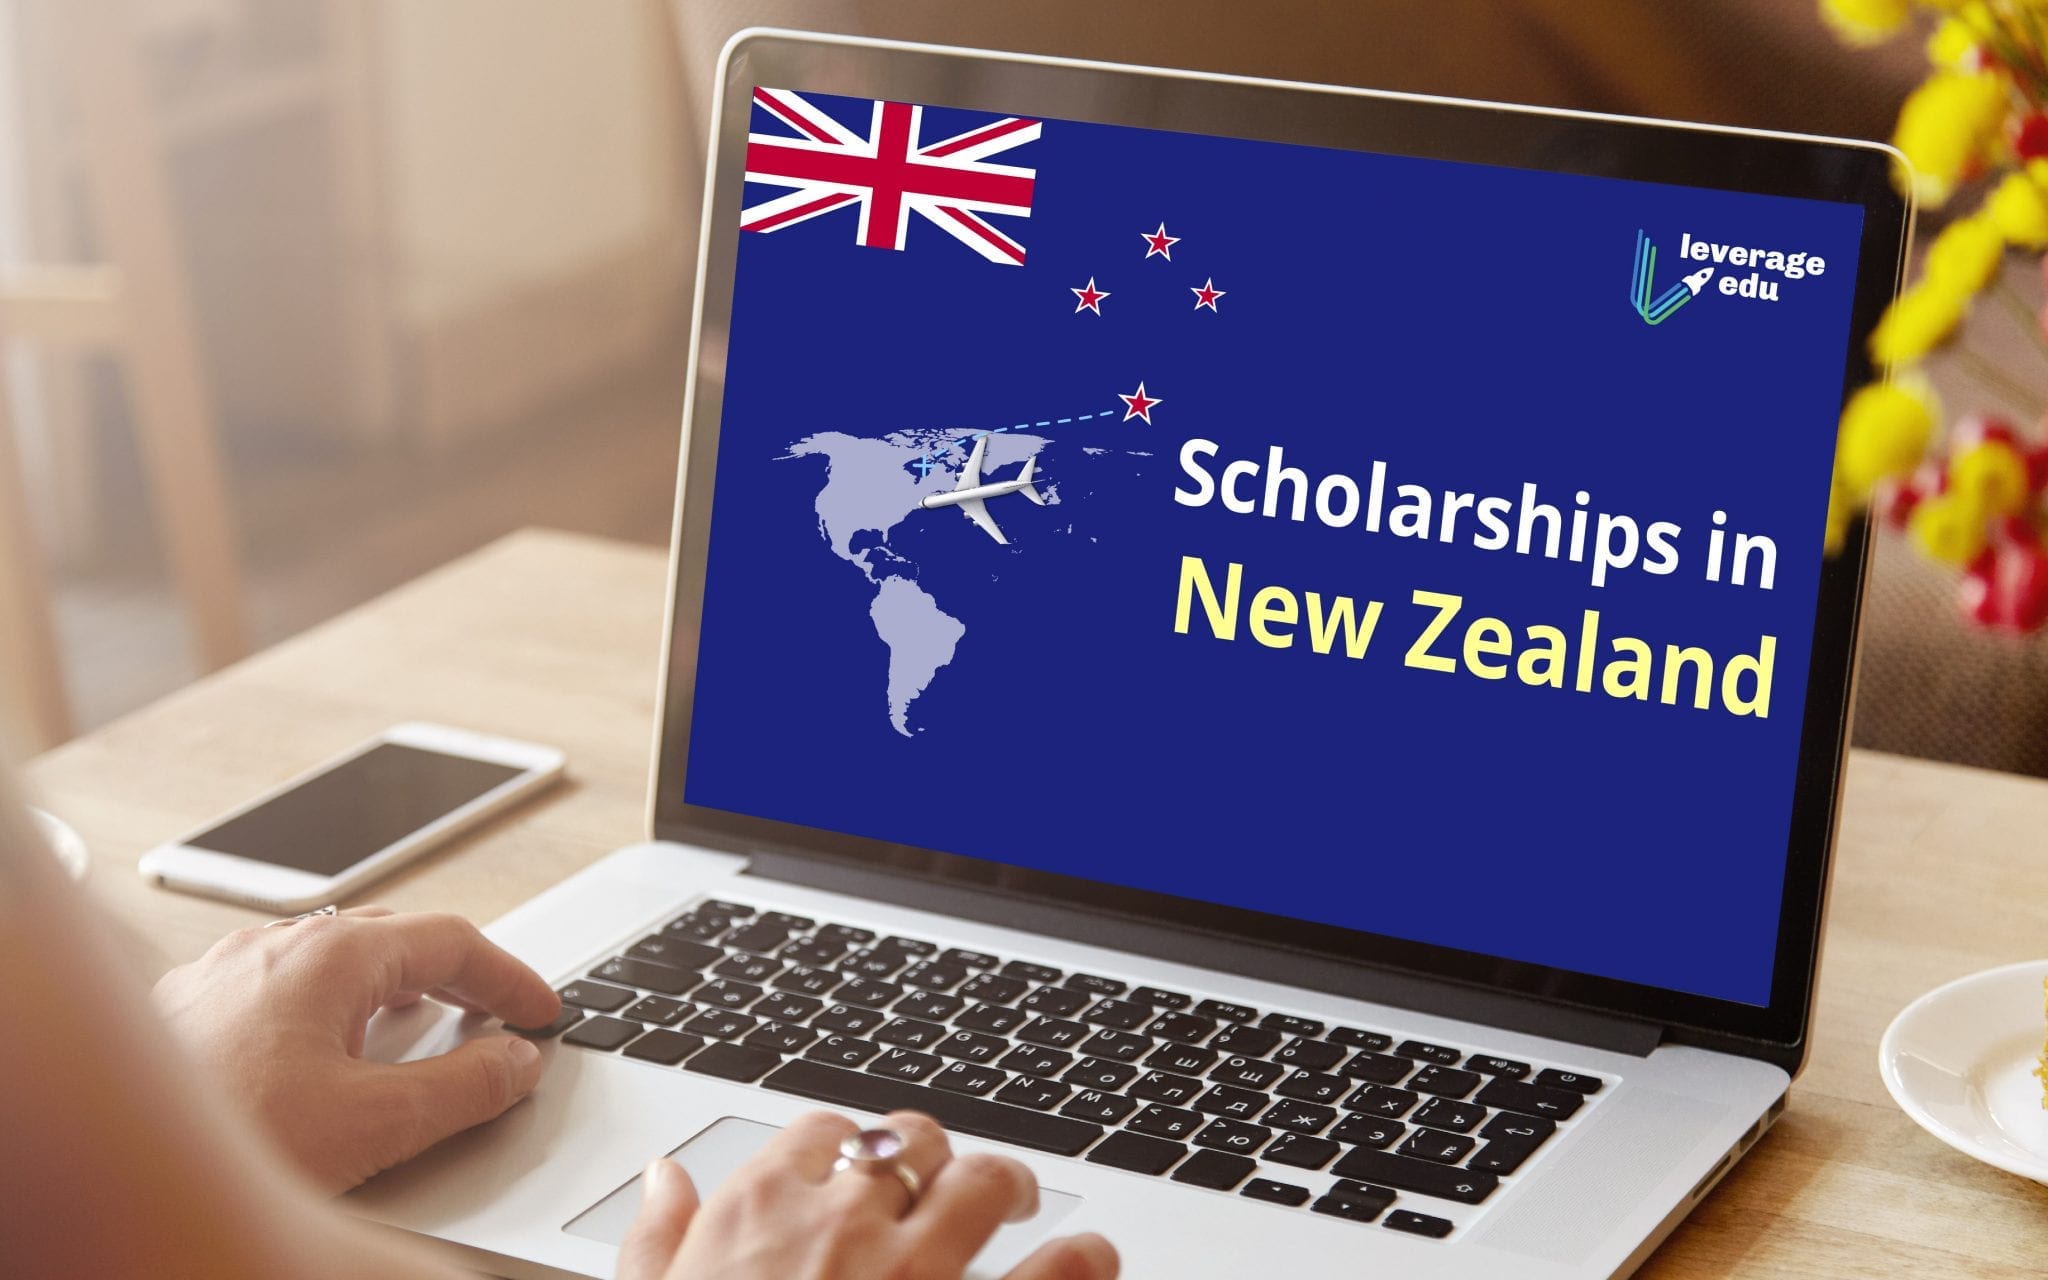 Top Scholarships in New Zealand for Indian Students 2021 Leverage Edu